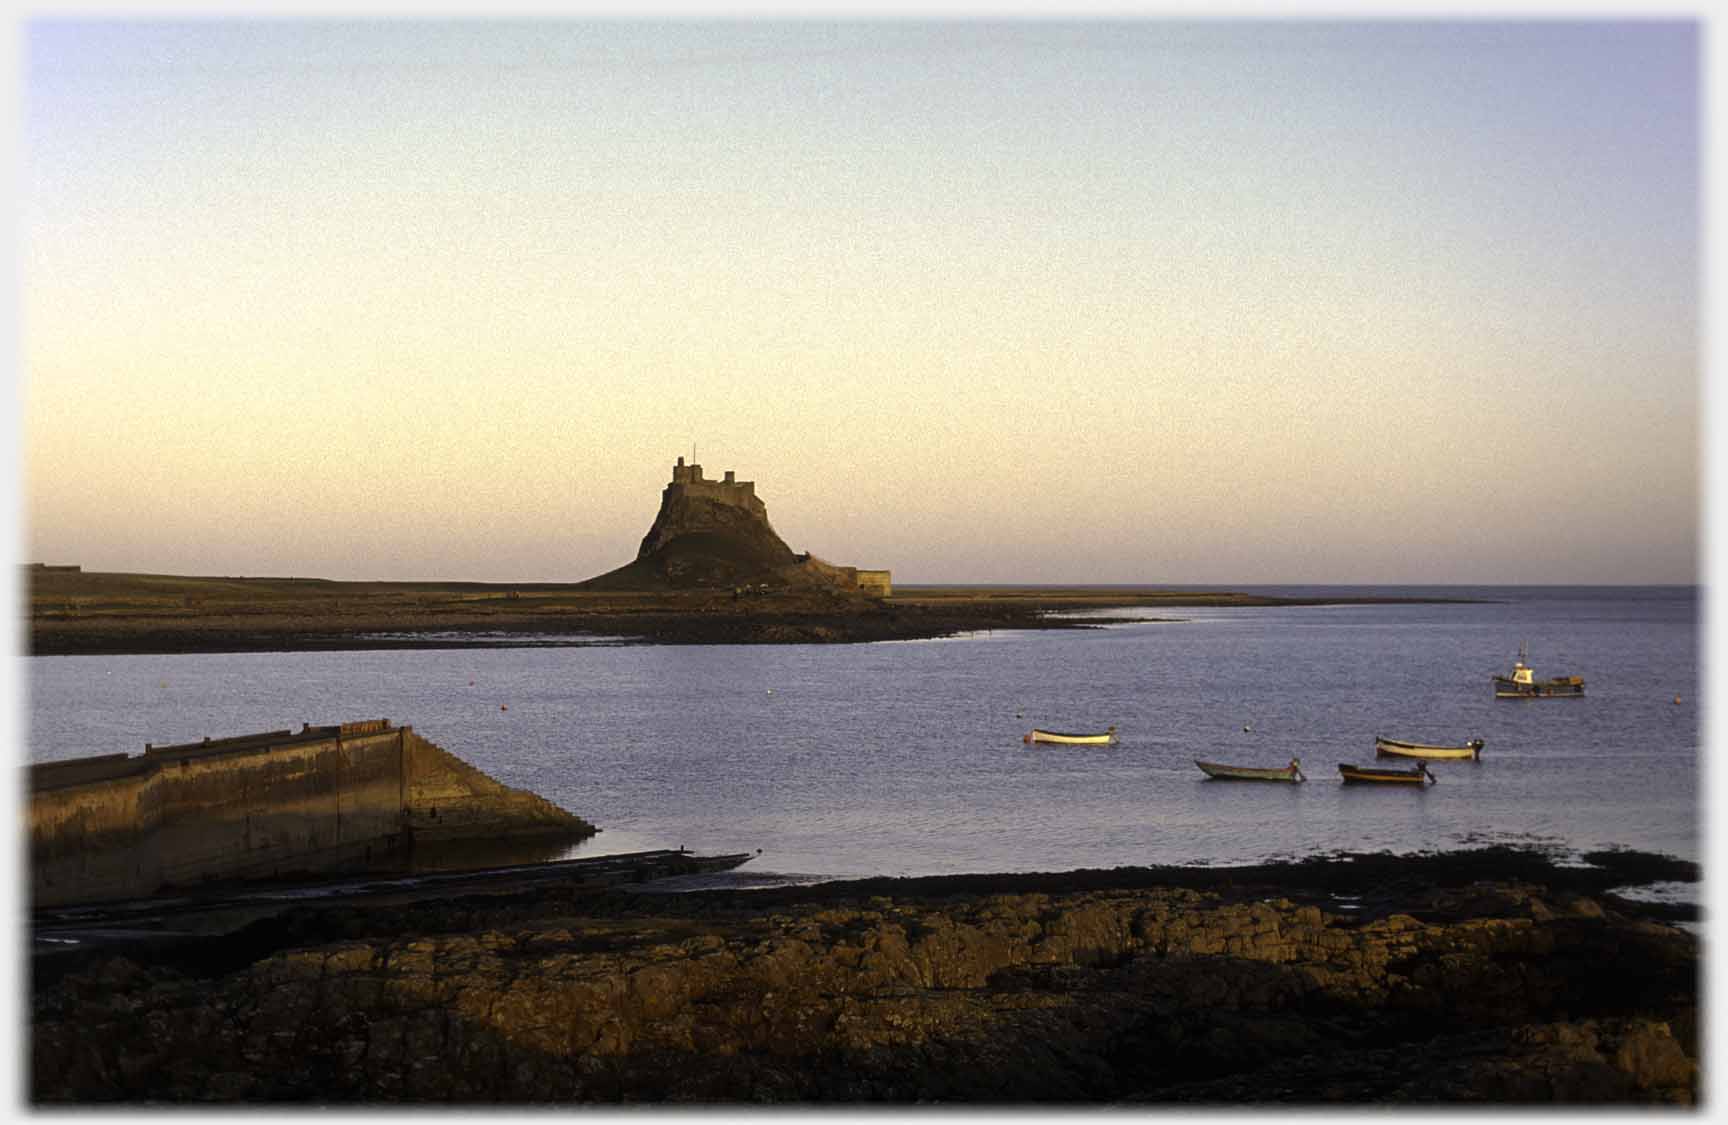 Castle on hillock, sea in foreground with five boats anchored, shore rocks,light nearly gone.